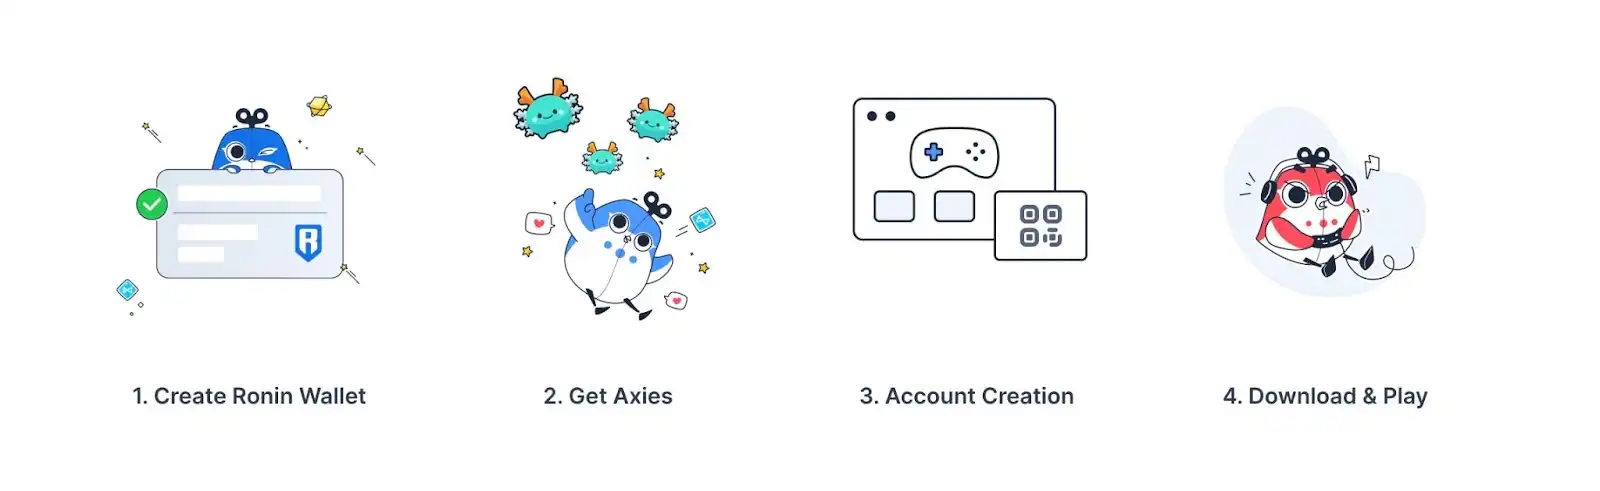 Screenshot of an illustration of the Ronin wallet setup process, containing four steps. Step 1, create Ronin Wallet. Step 2, get Axies. Step 3, account creation. Step 4 download and play.